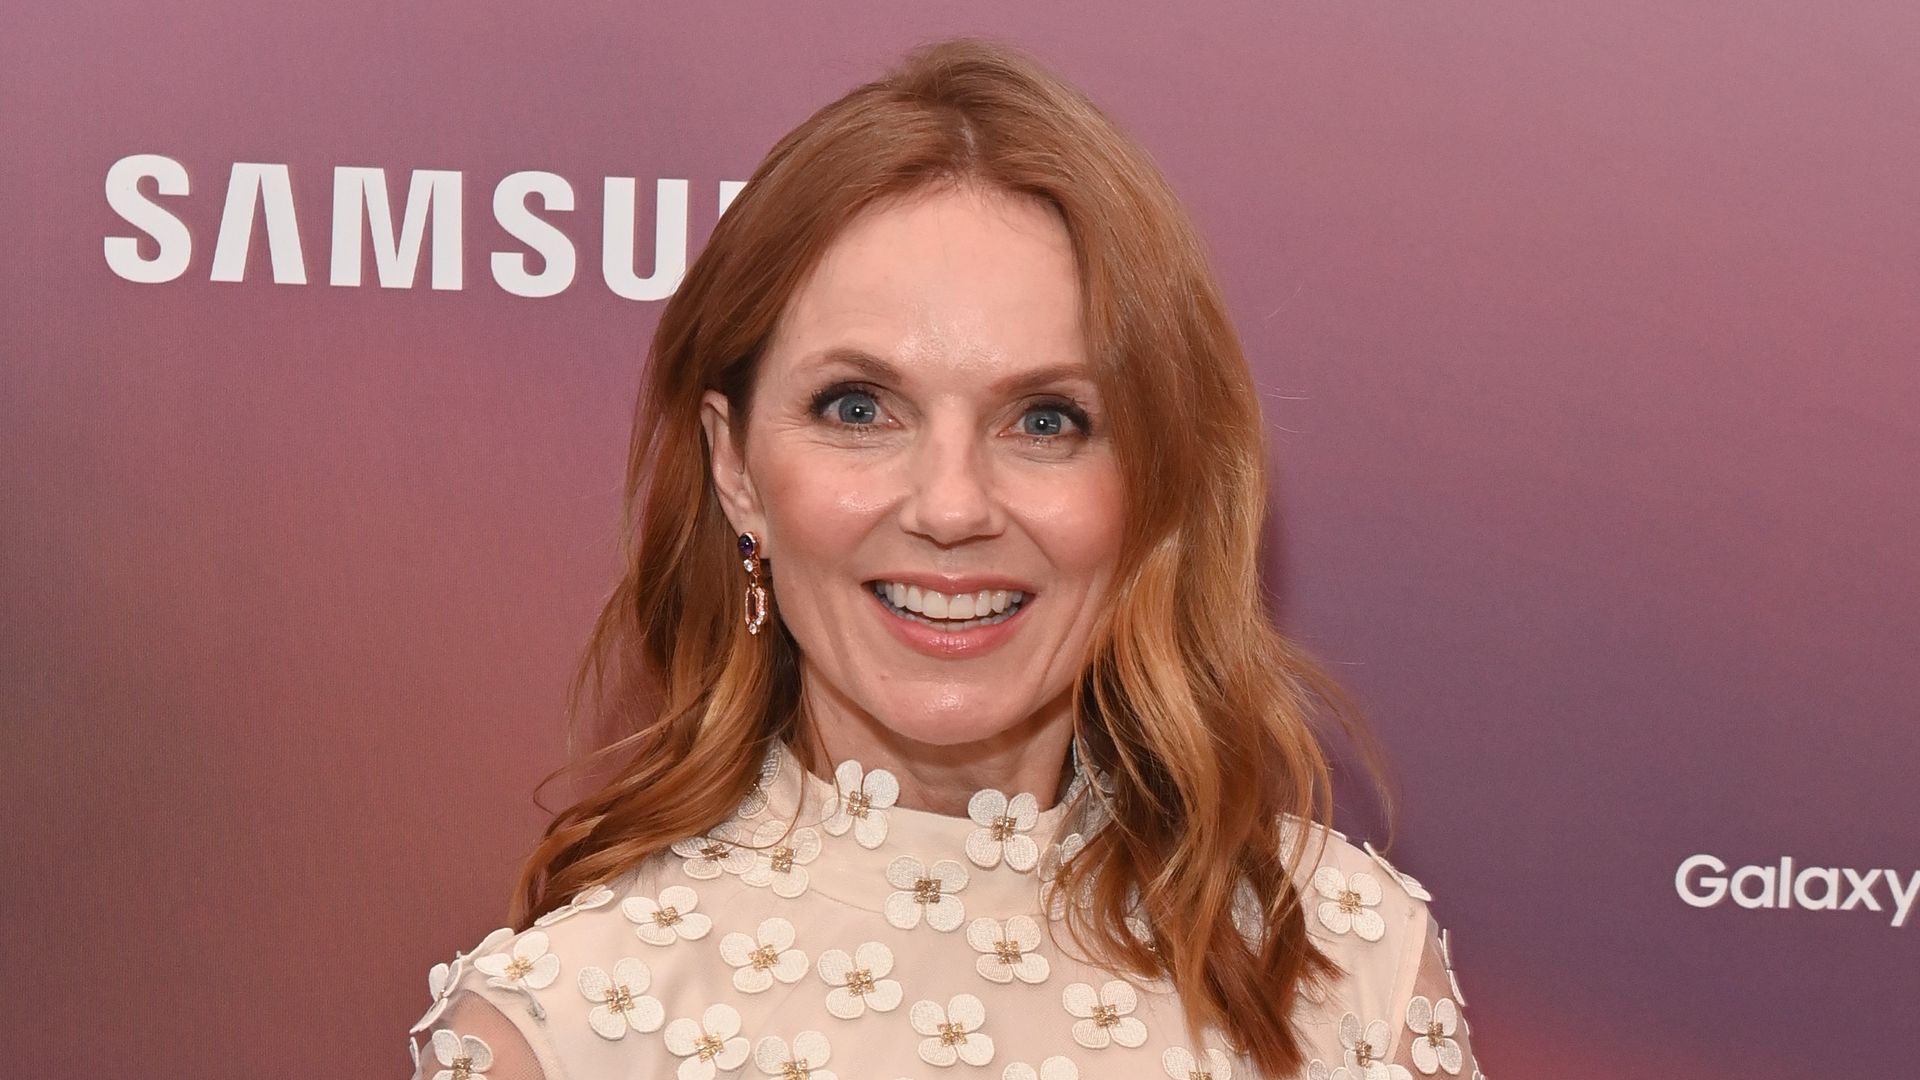 Geri Halliwell-Horner in white sheer dress covered with flowers